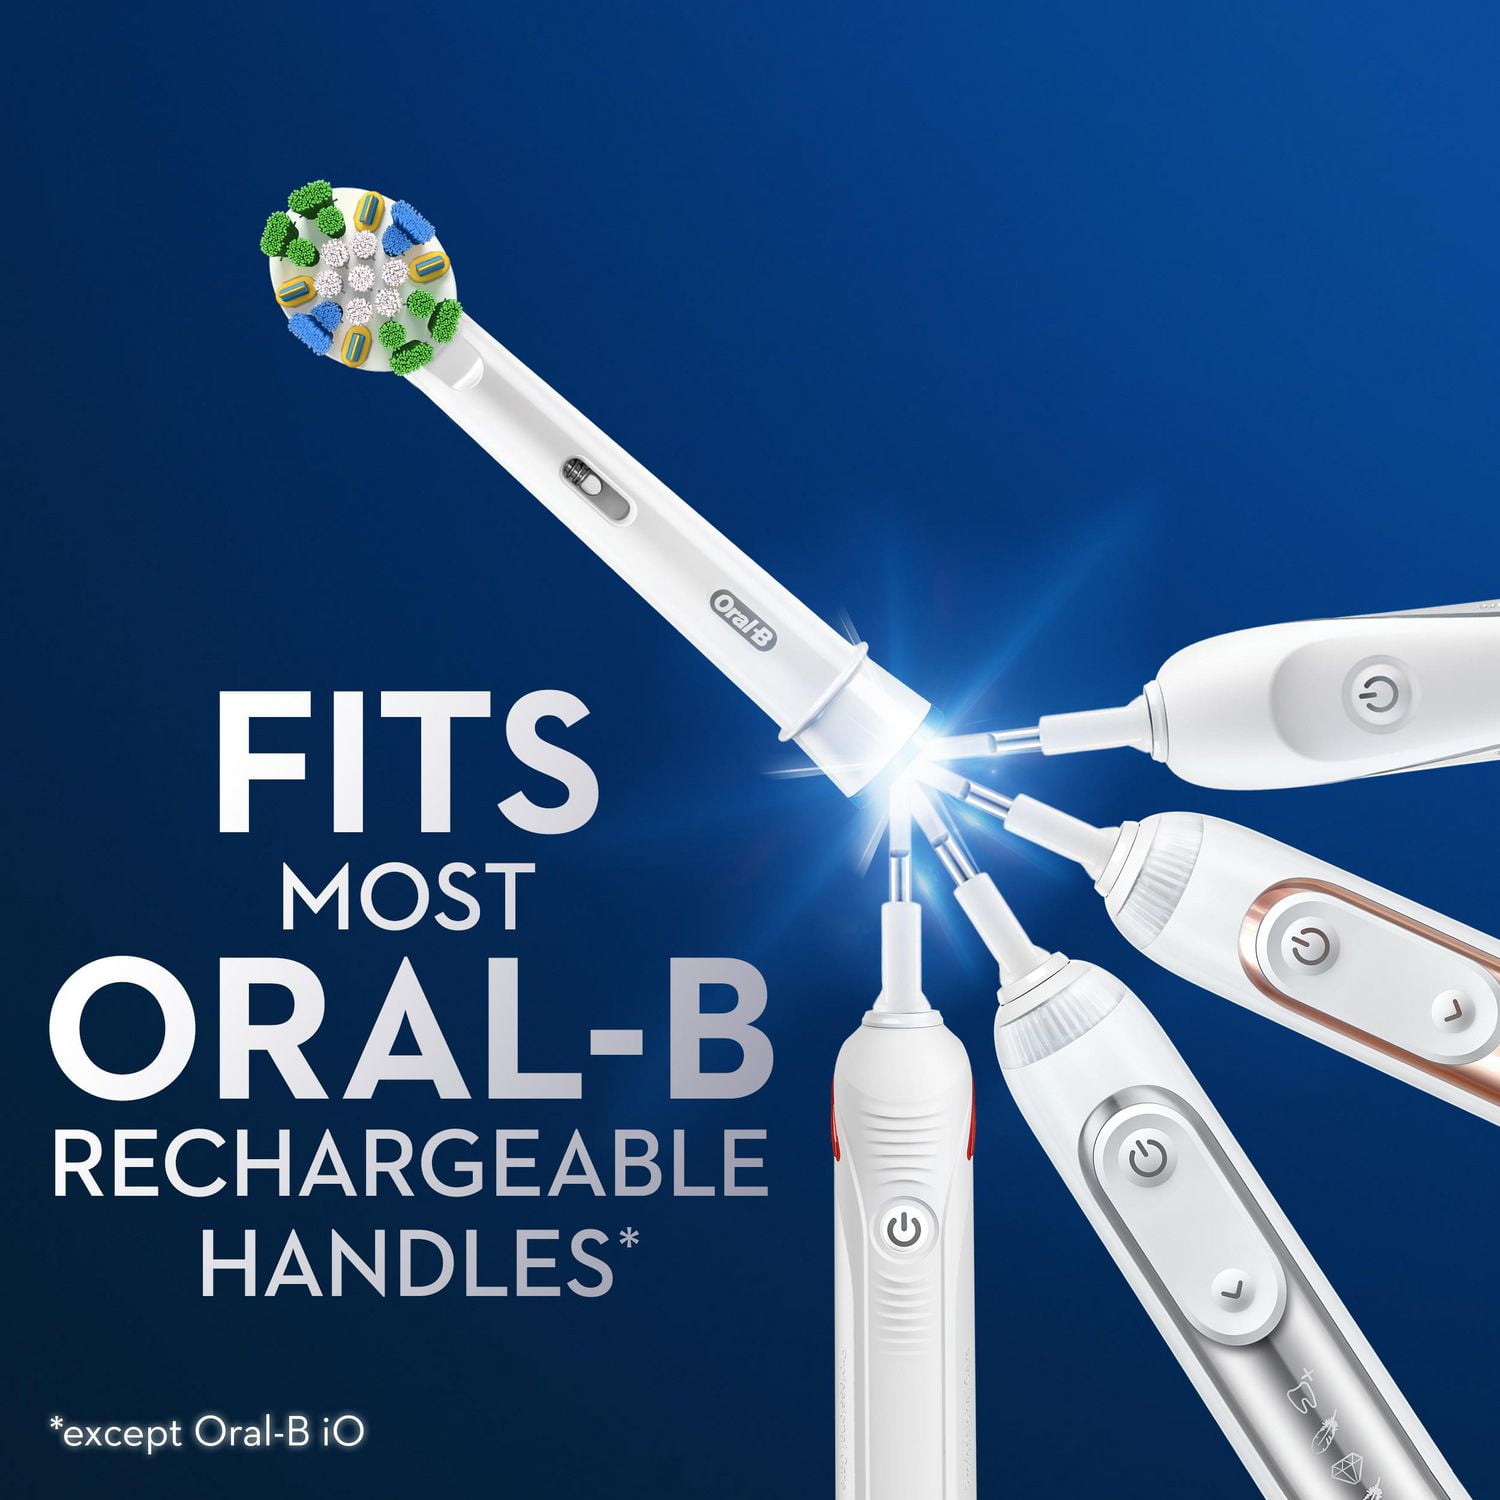 8 Oral B Floss Action Brush Heads Braun Replacement Electric Toothbrush  Refills